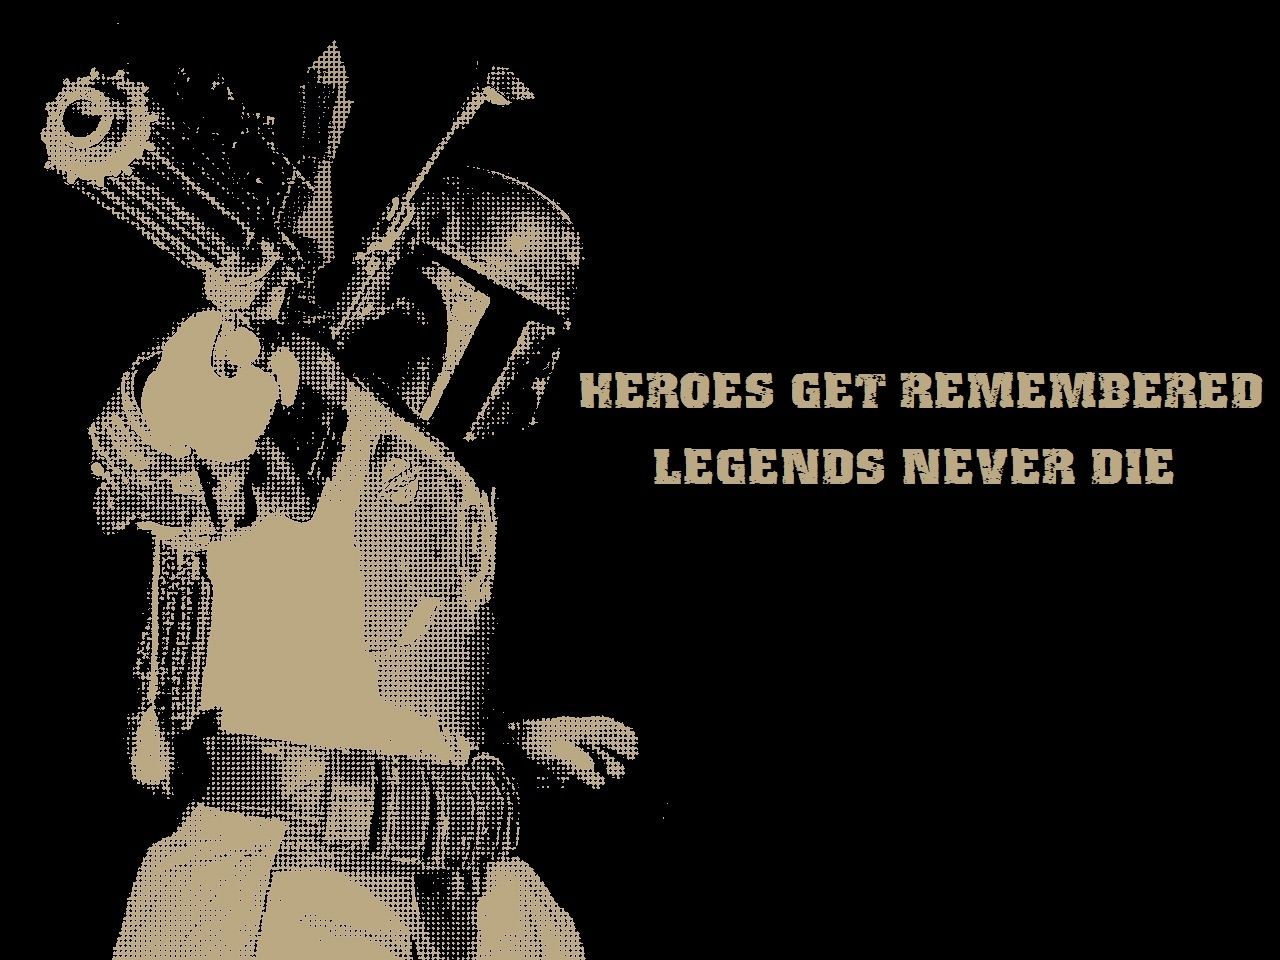 Download Wallpaper, Download 2560x1920 star wars quotes boba fett 1280x960 wallpaper Wallpaper –Free Wallpaper Download